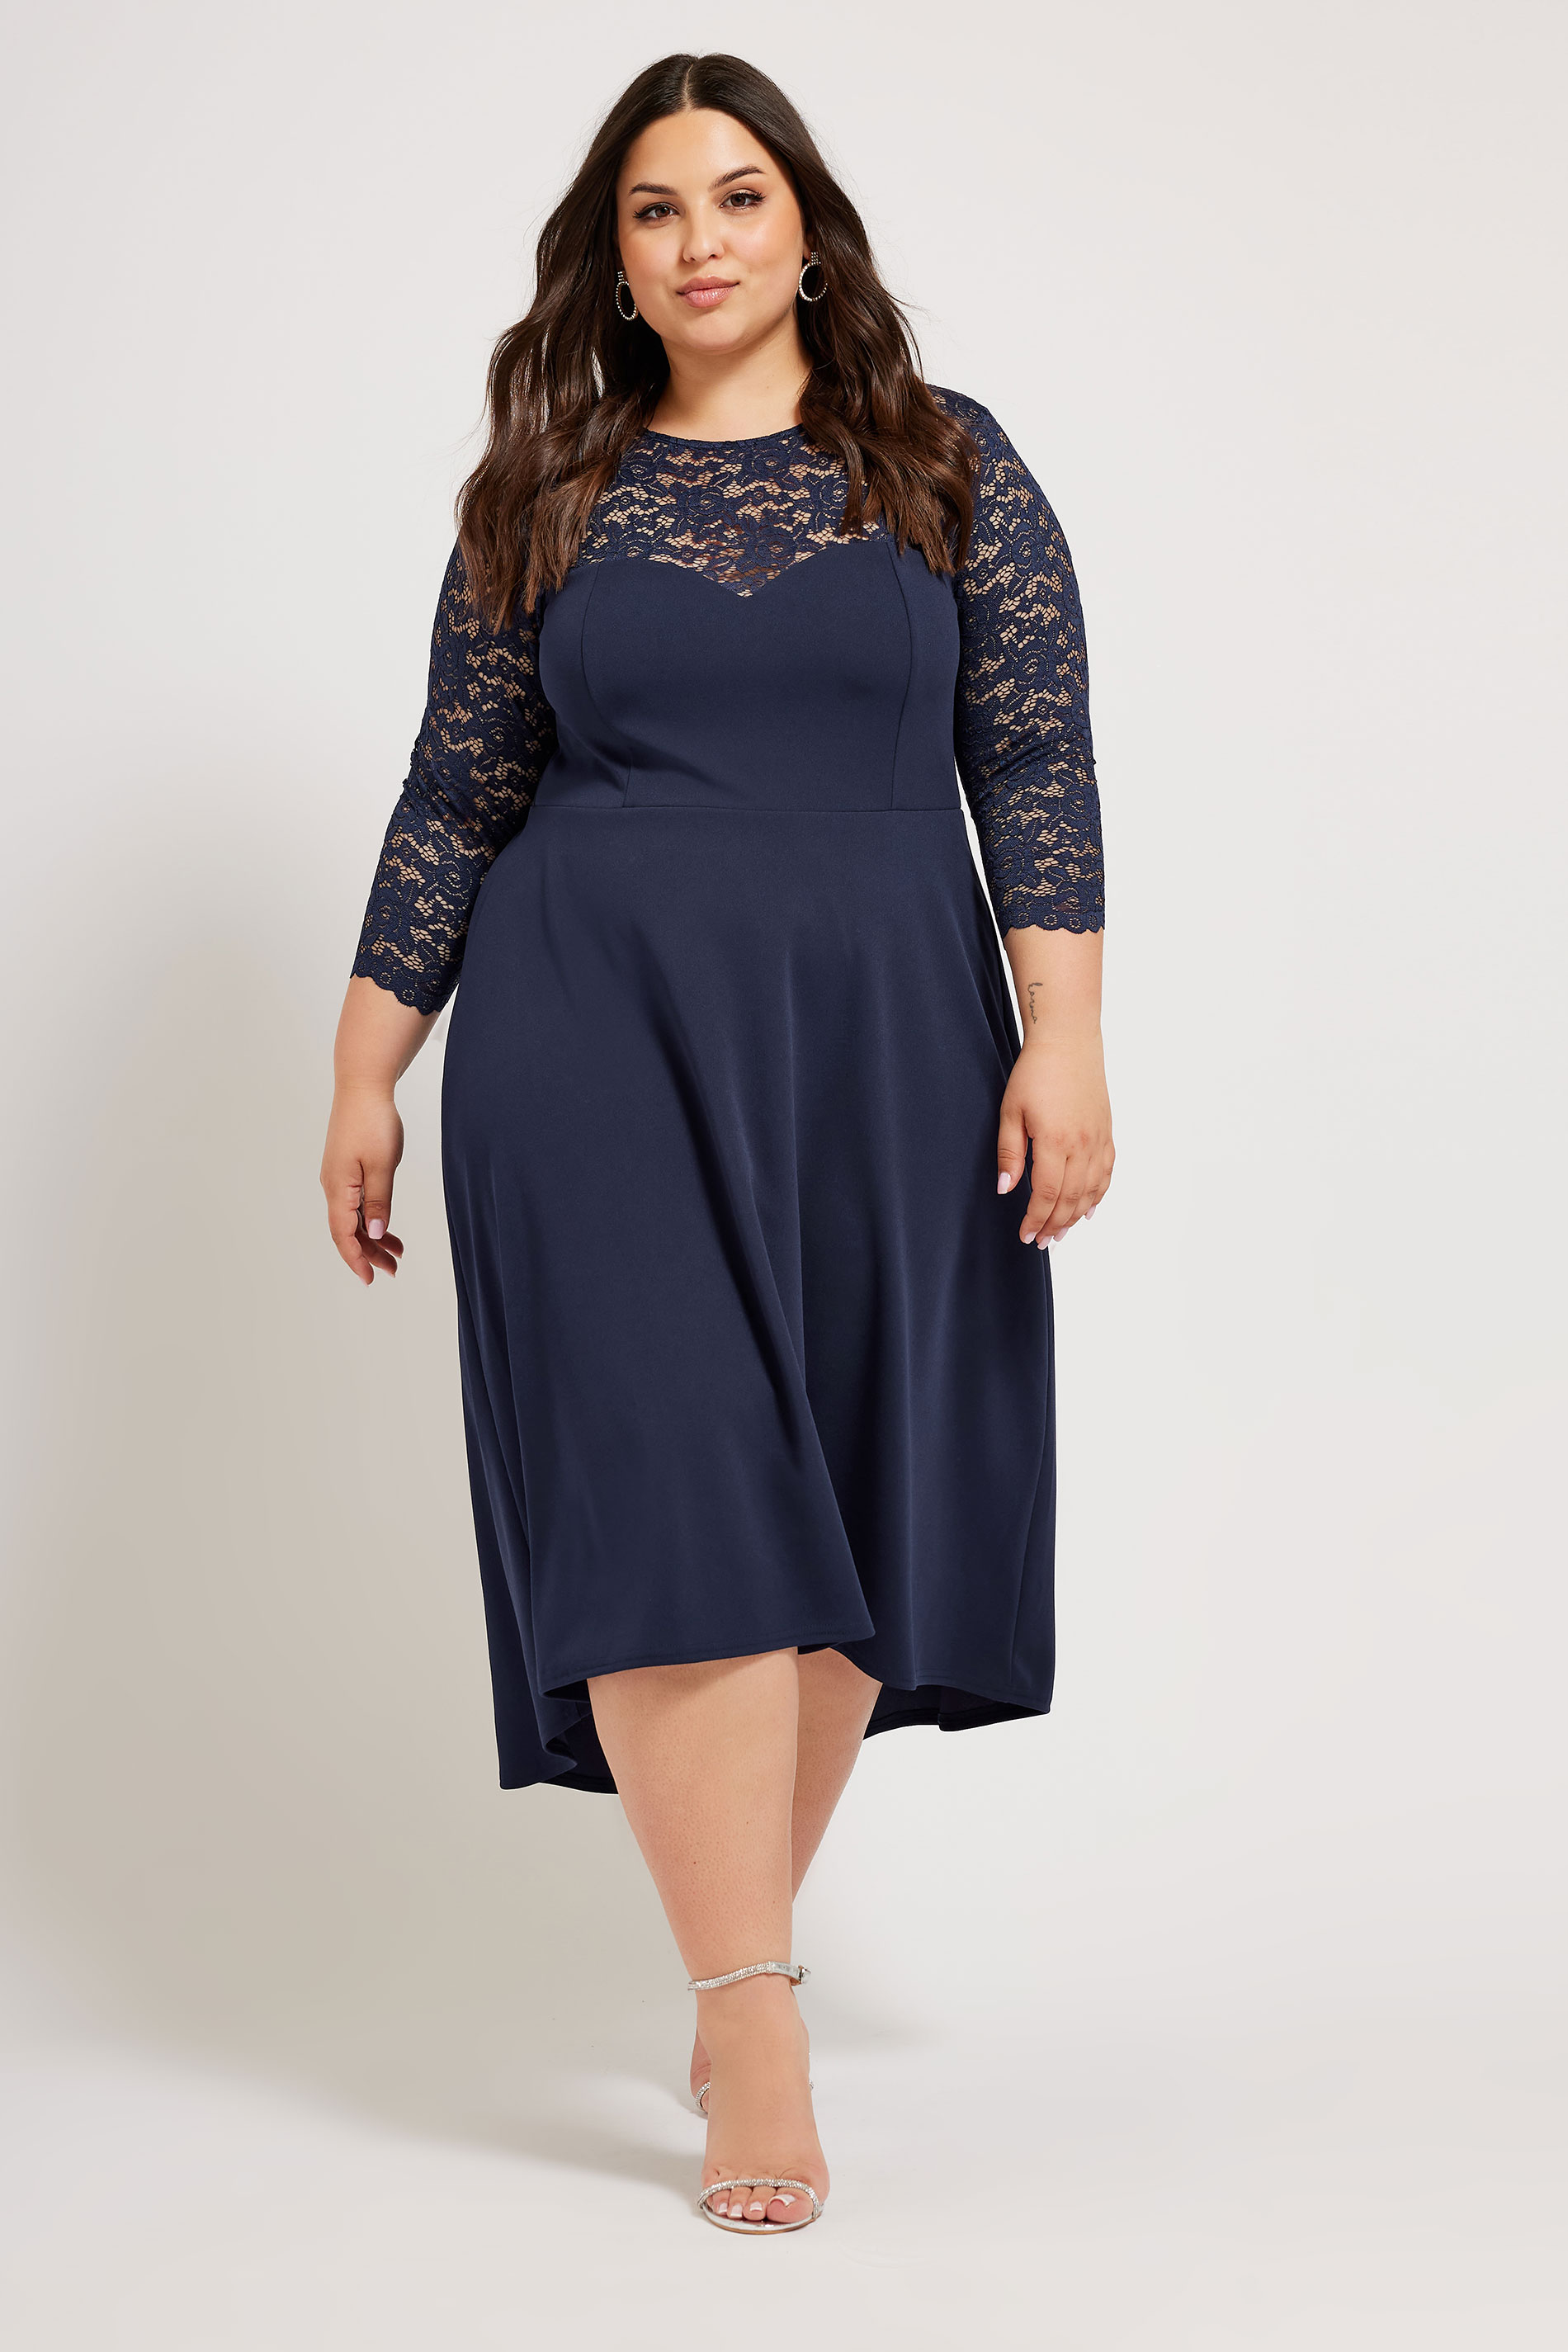 YOURS LONDON Plus Size Navy Blue Lace Sweetheart Dress | Yours Clothing 1